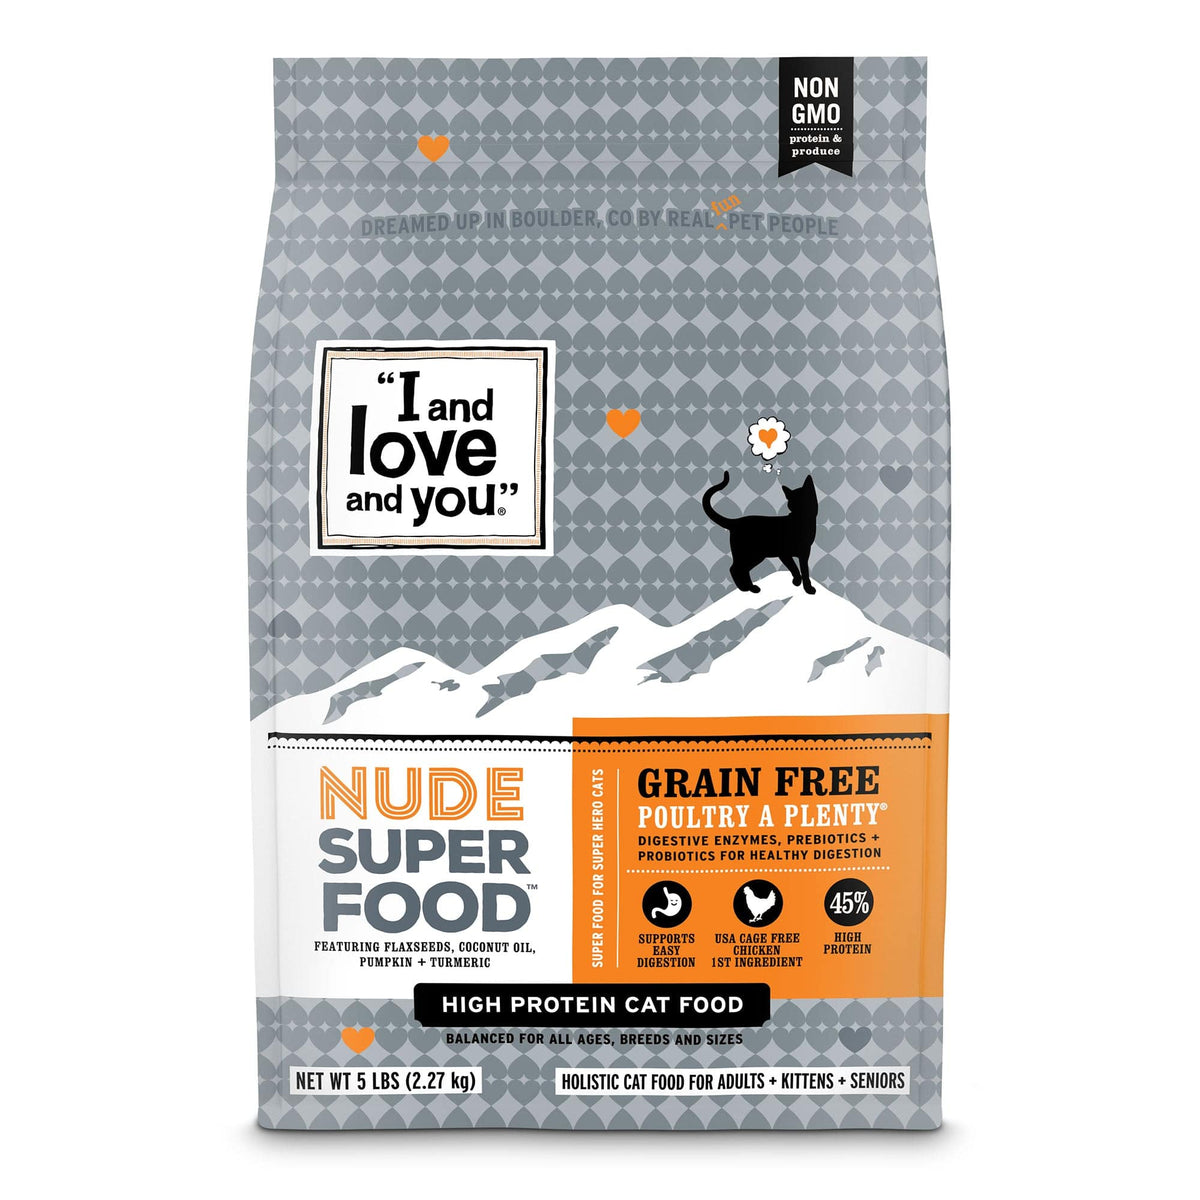 Nude Super Food - Poultry a Plenty: Cat food bag with label, cat on wall, and text signs.